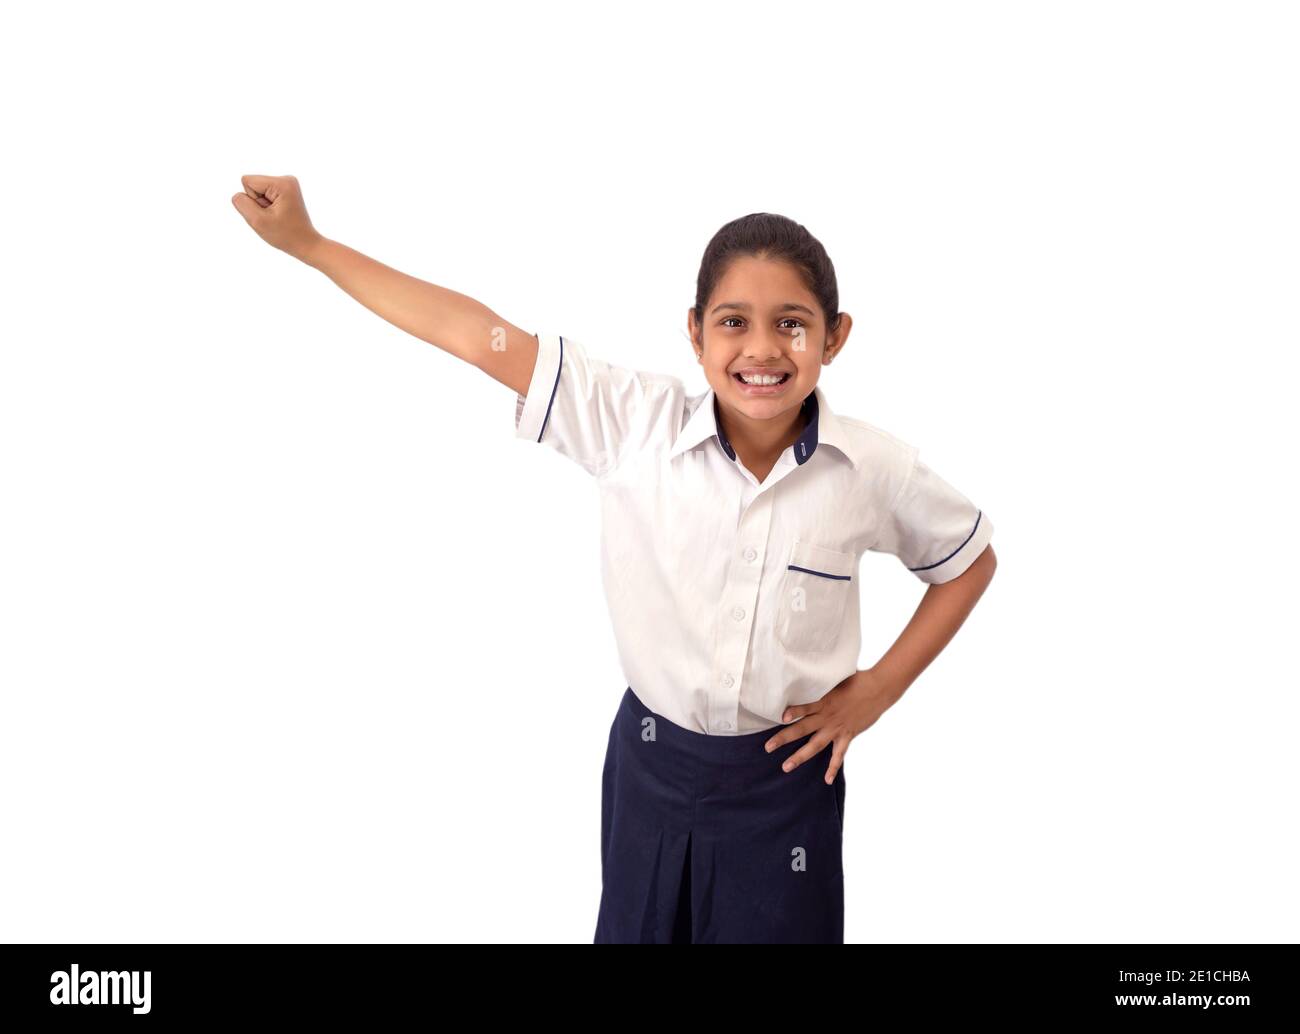 Portrait of a excited, confident and smiling Indian school girl in uniform  with right arm outstretched depicting achievement and victory Stock Photo